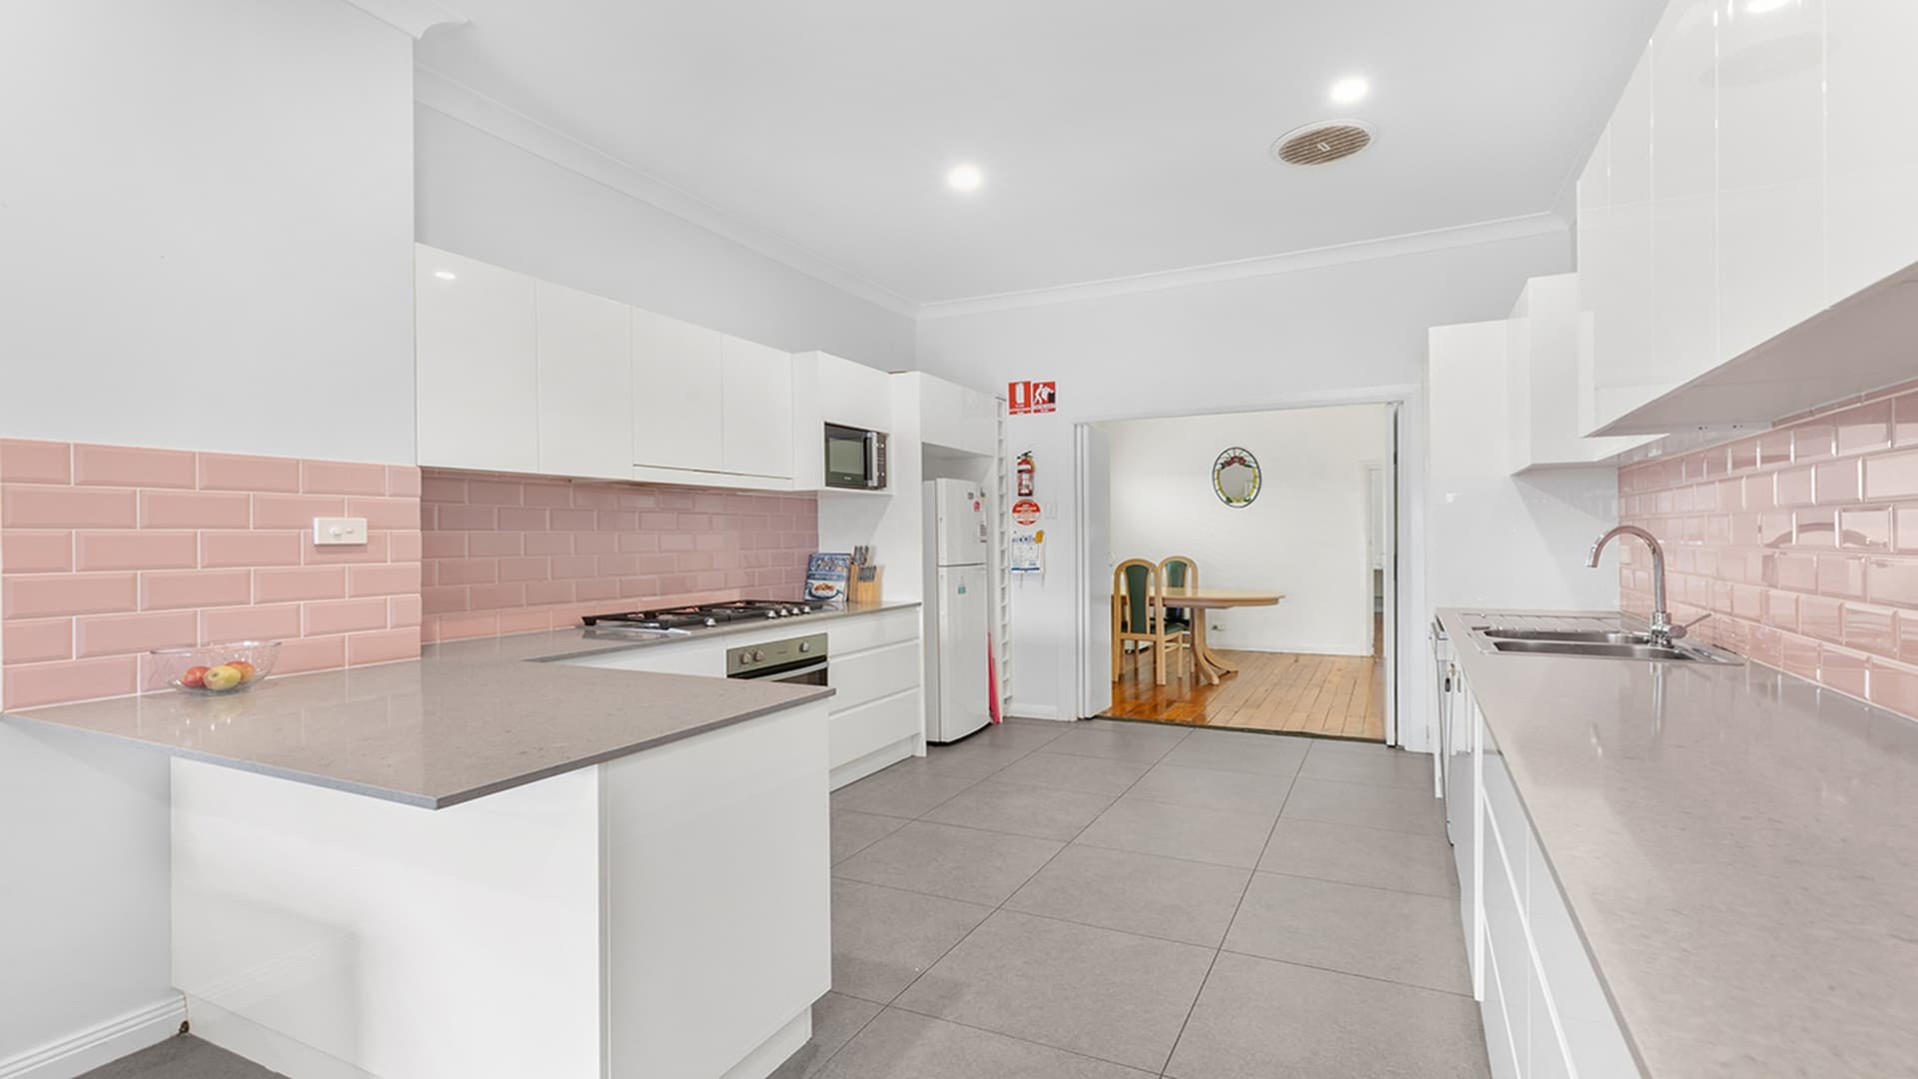 Large kitchen, easy access with lots of benches and pink tiled splash back.